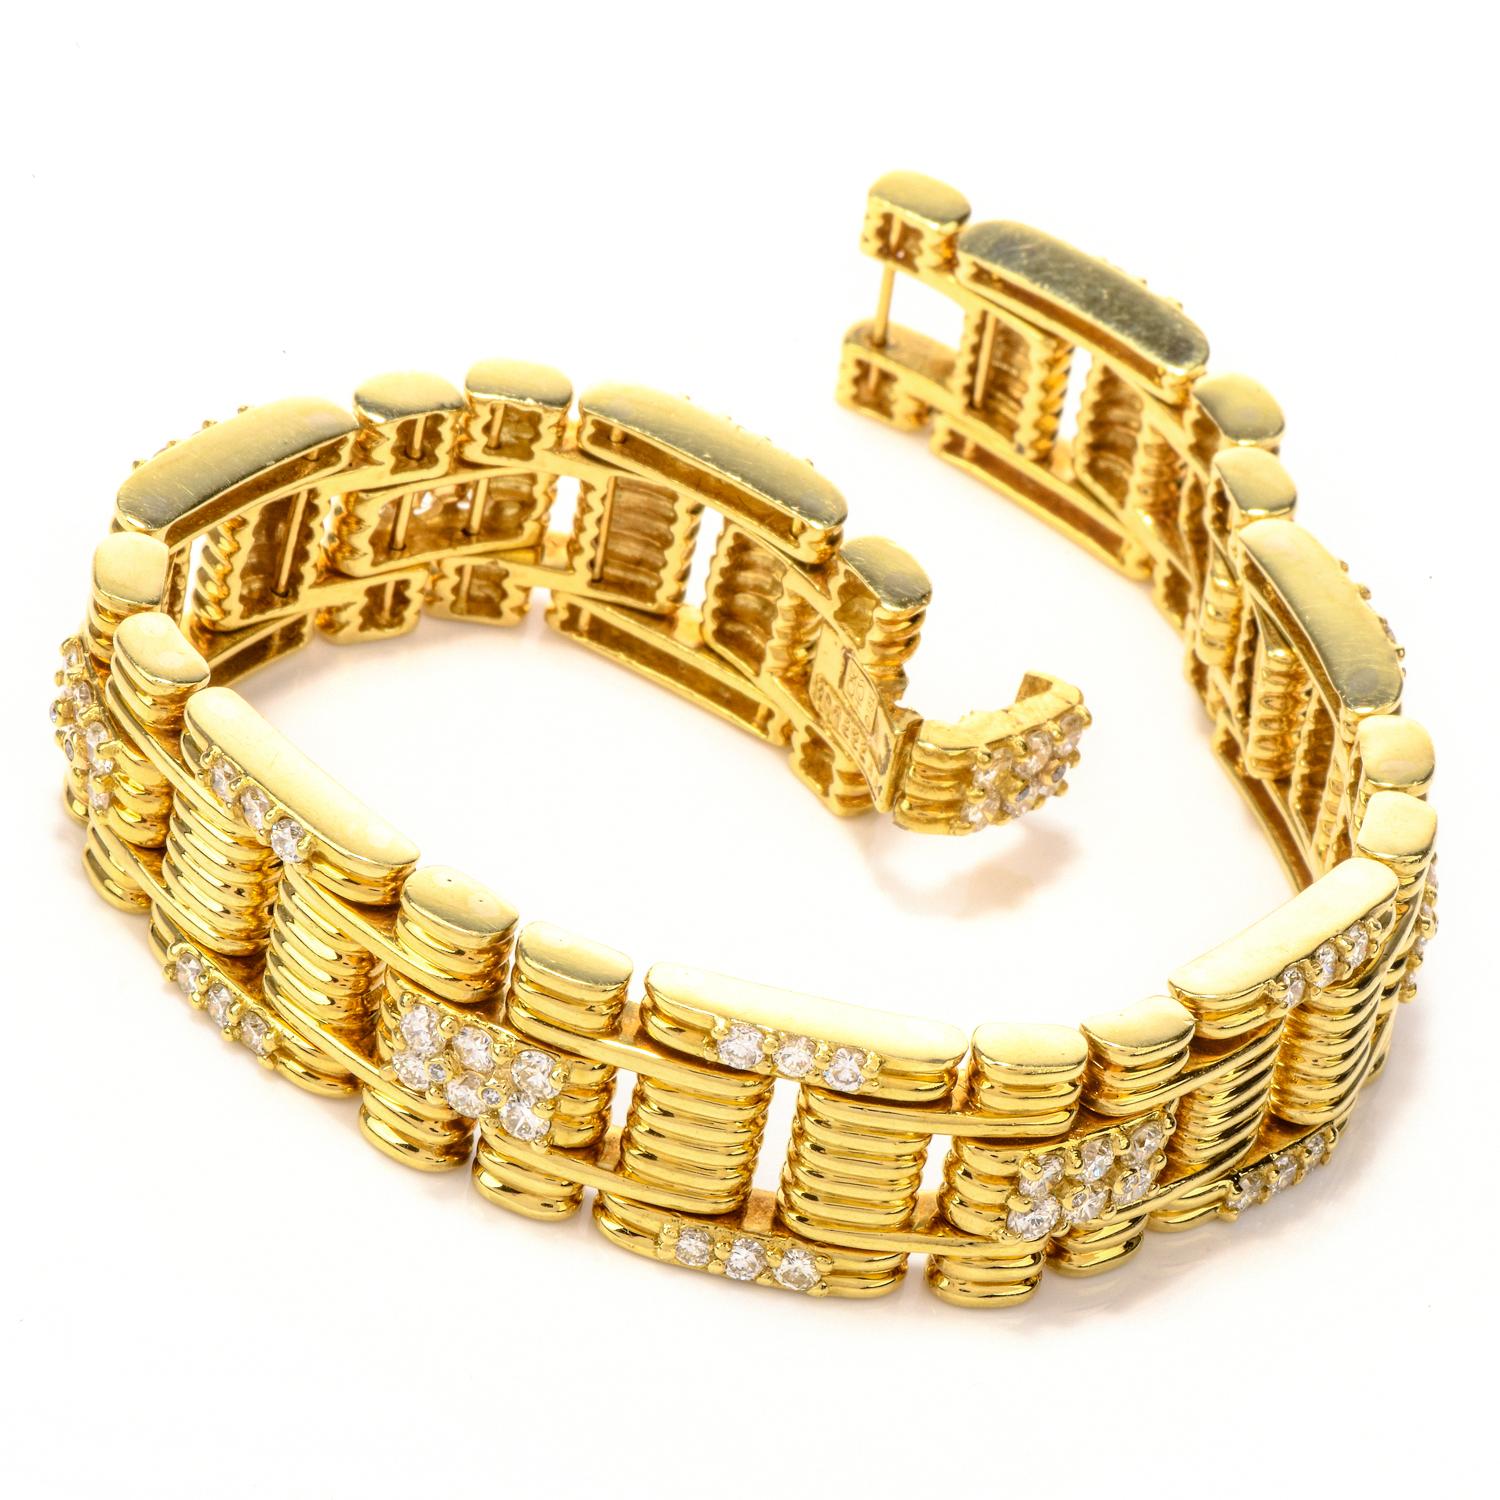 A Glimpse at Sleek Design!
Crafted in 70.4 grams of luxurious 18K yellow gold, this 1980's Jose Hess masterpiece bracelet features an alternating diamond embellished ribbed link sequence. 

It set with 78 fine quality natural round diamond weighing